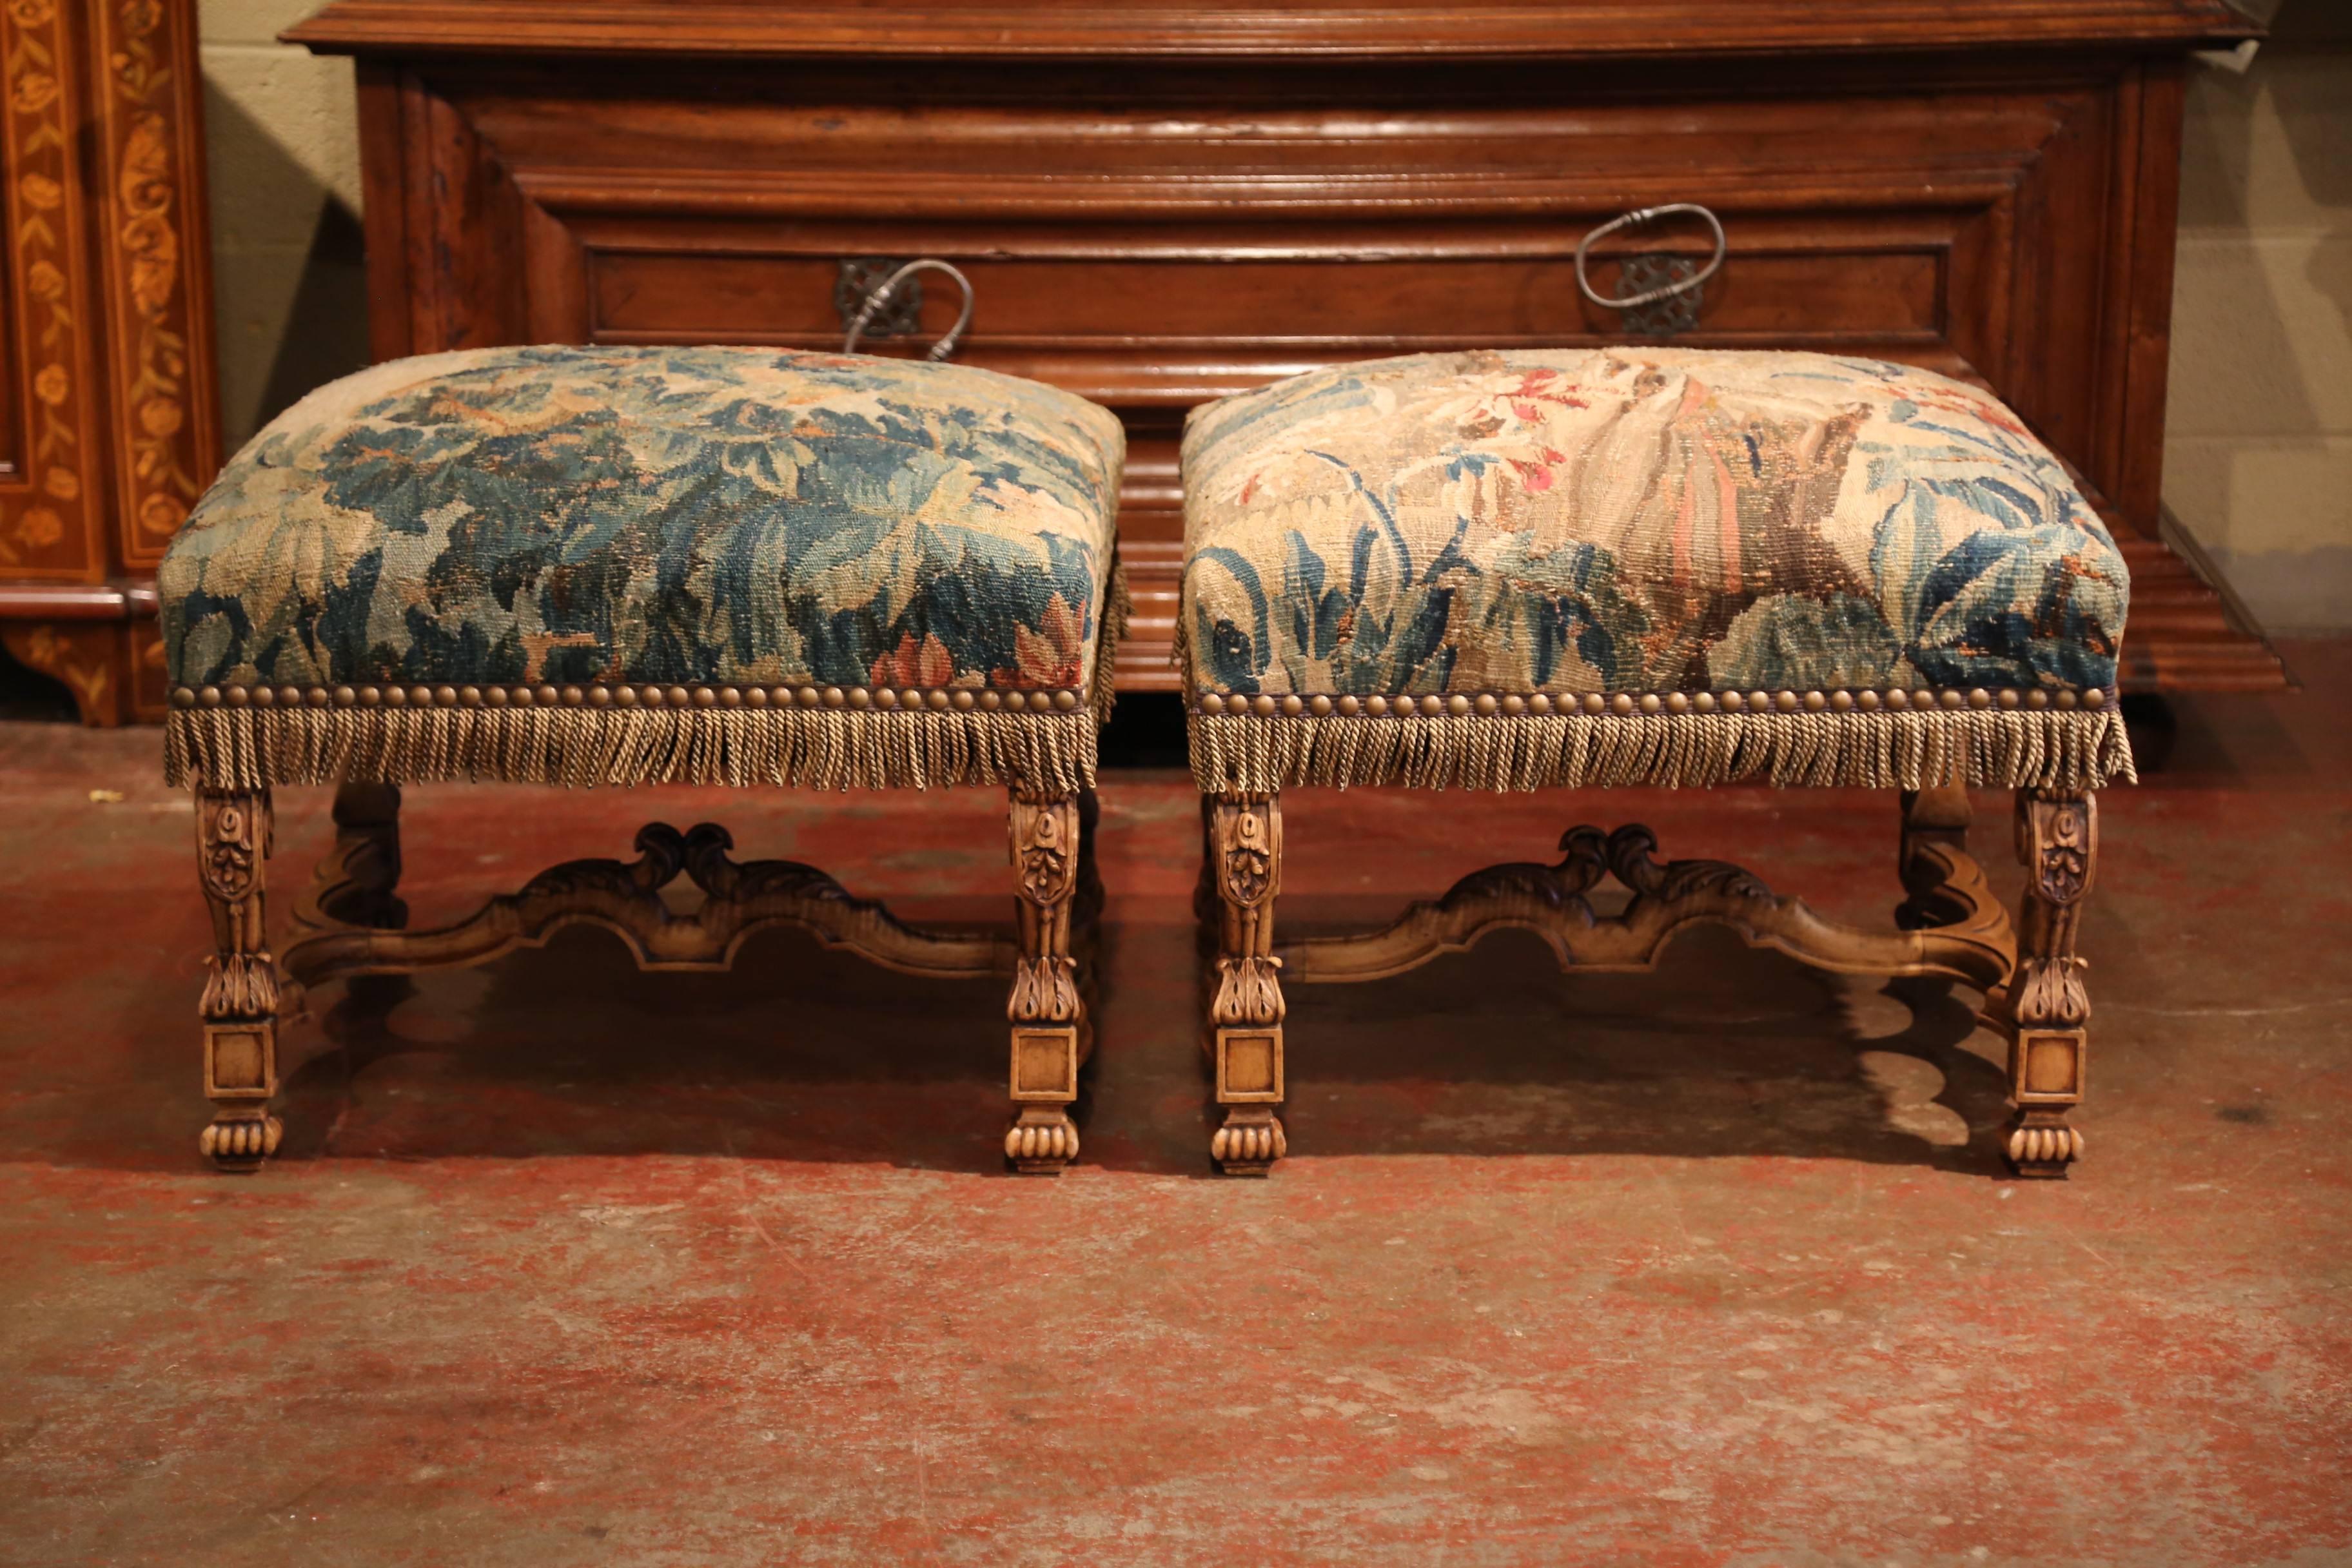 Crafted in southern France circa 1870 and almost square in shape, the elegant fruit wood ottomans stand on four carved legs embellished with an intricate stretcher and central finial. Both pieces are upholstered with 18th century Aubusson verdure